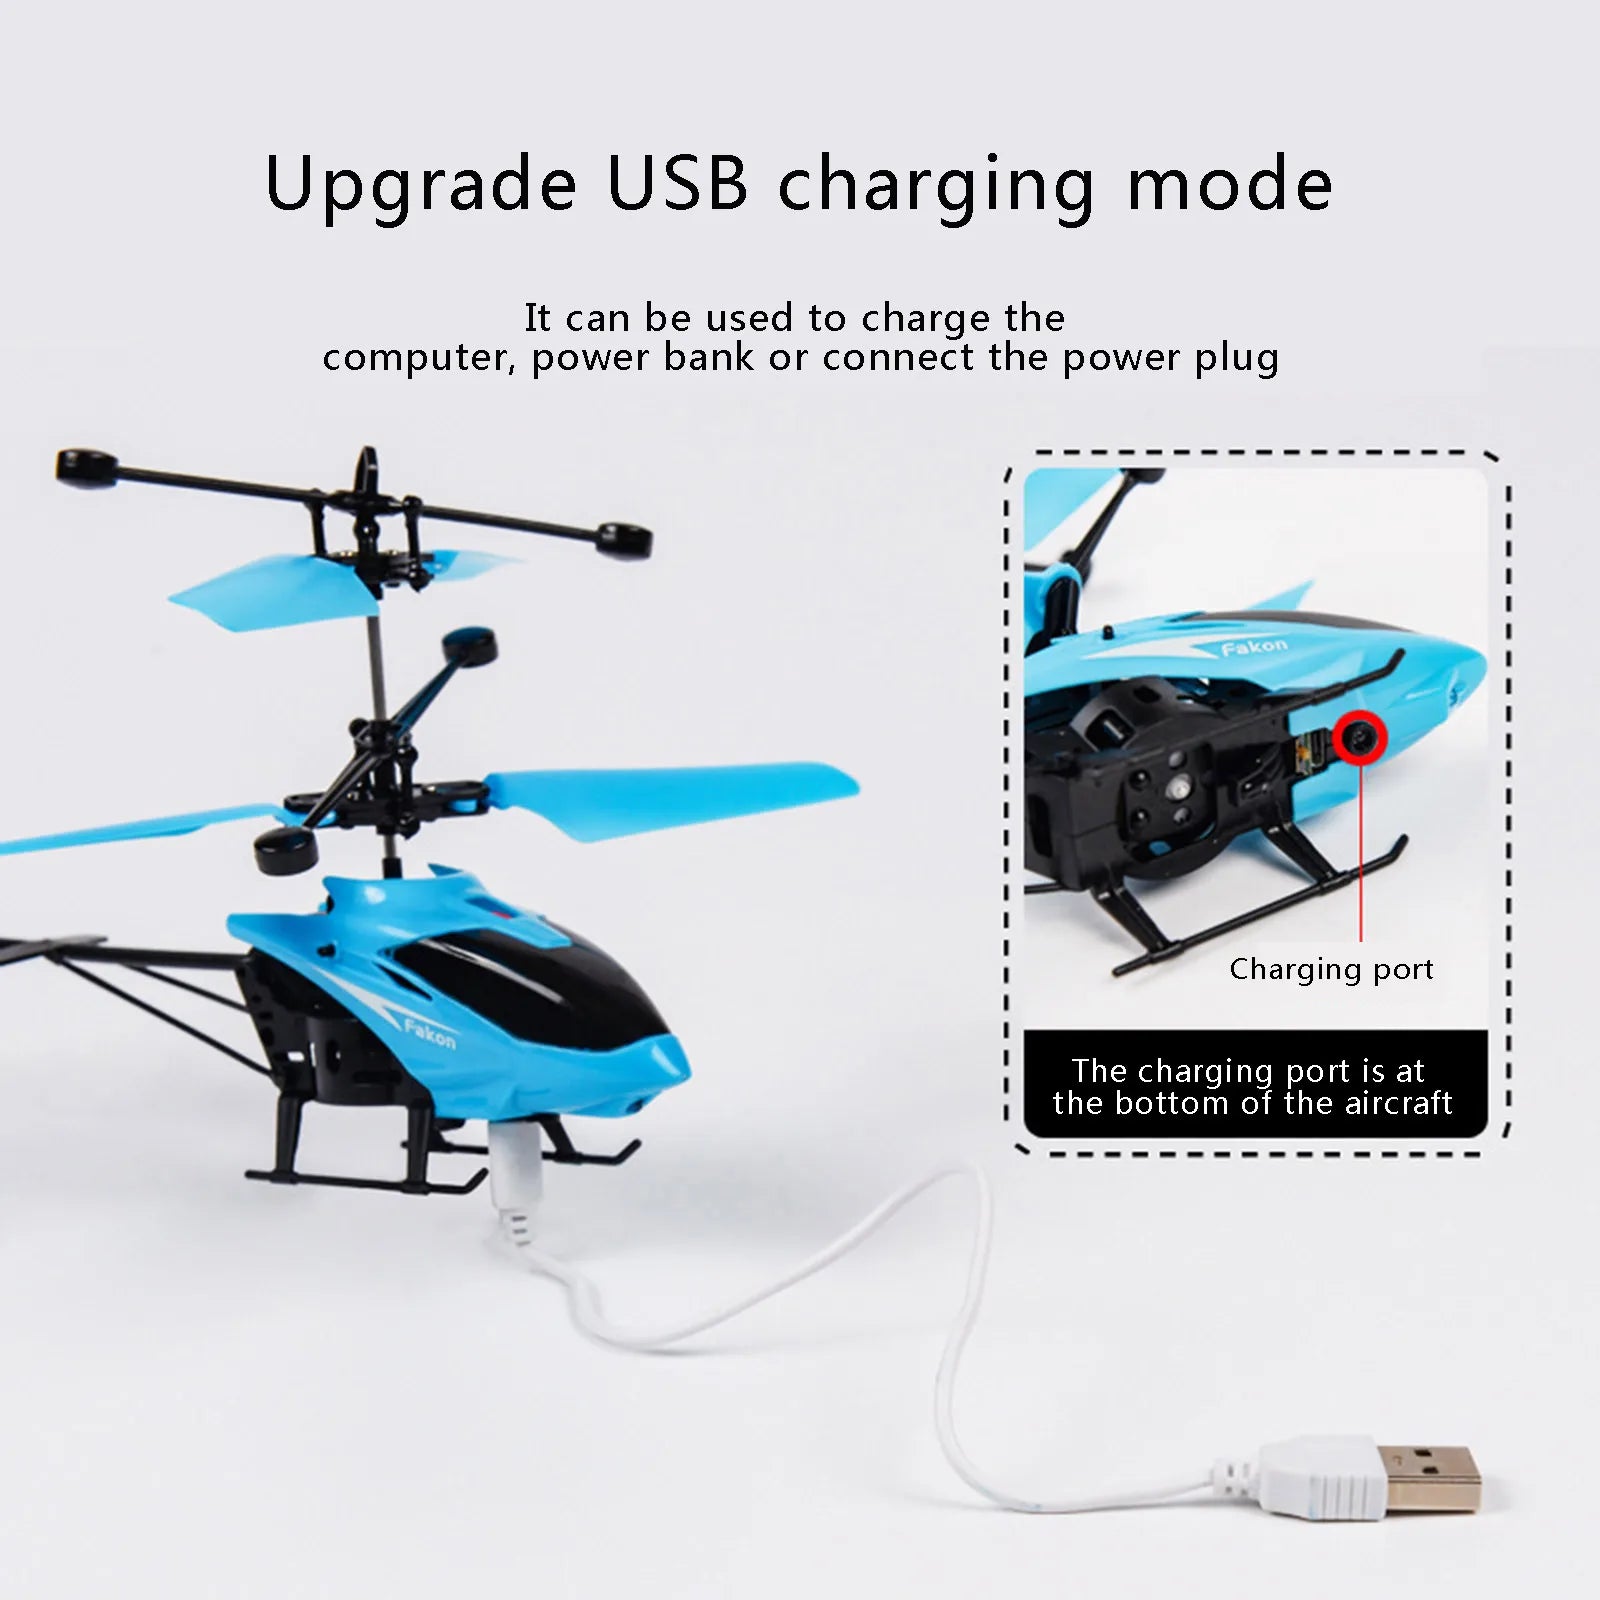 YKF1303 RC Helicopter, Upgrade USB charging mode It can be used to charge the computer; power bank or connect the power